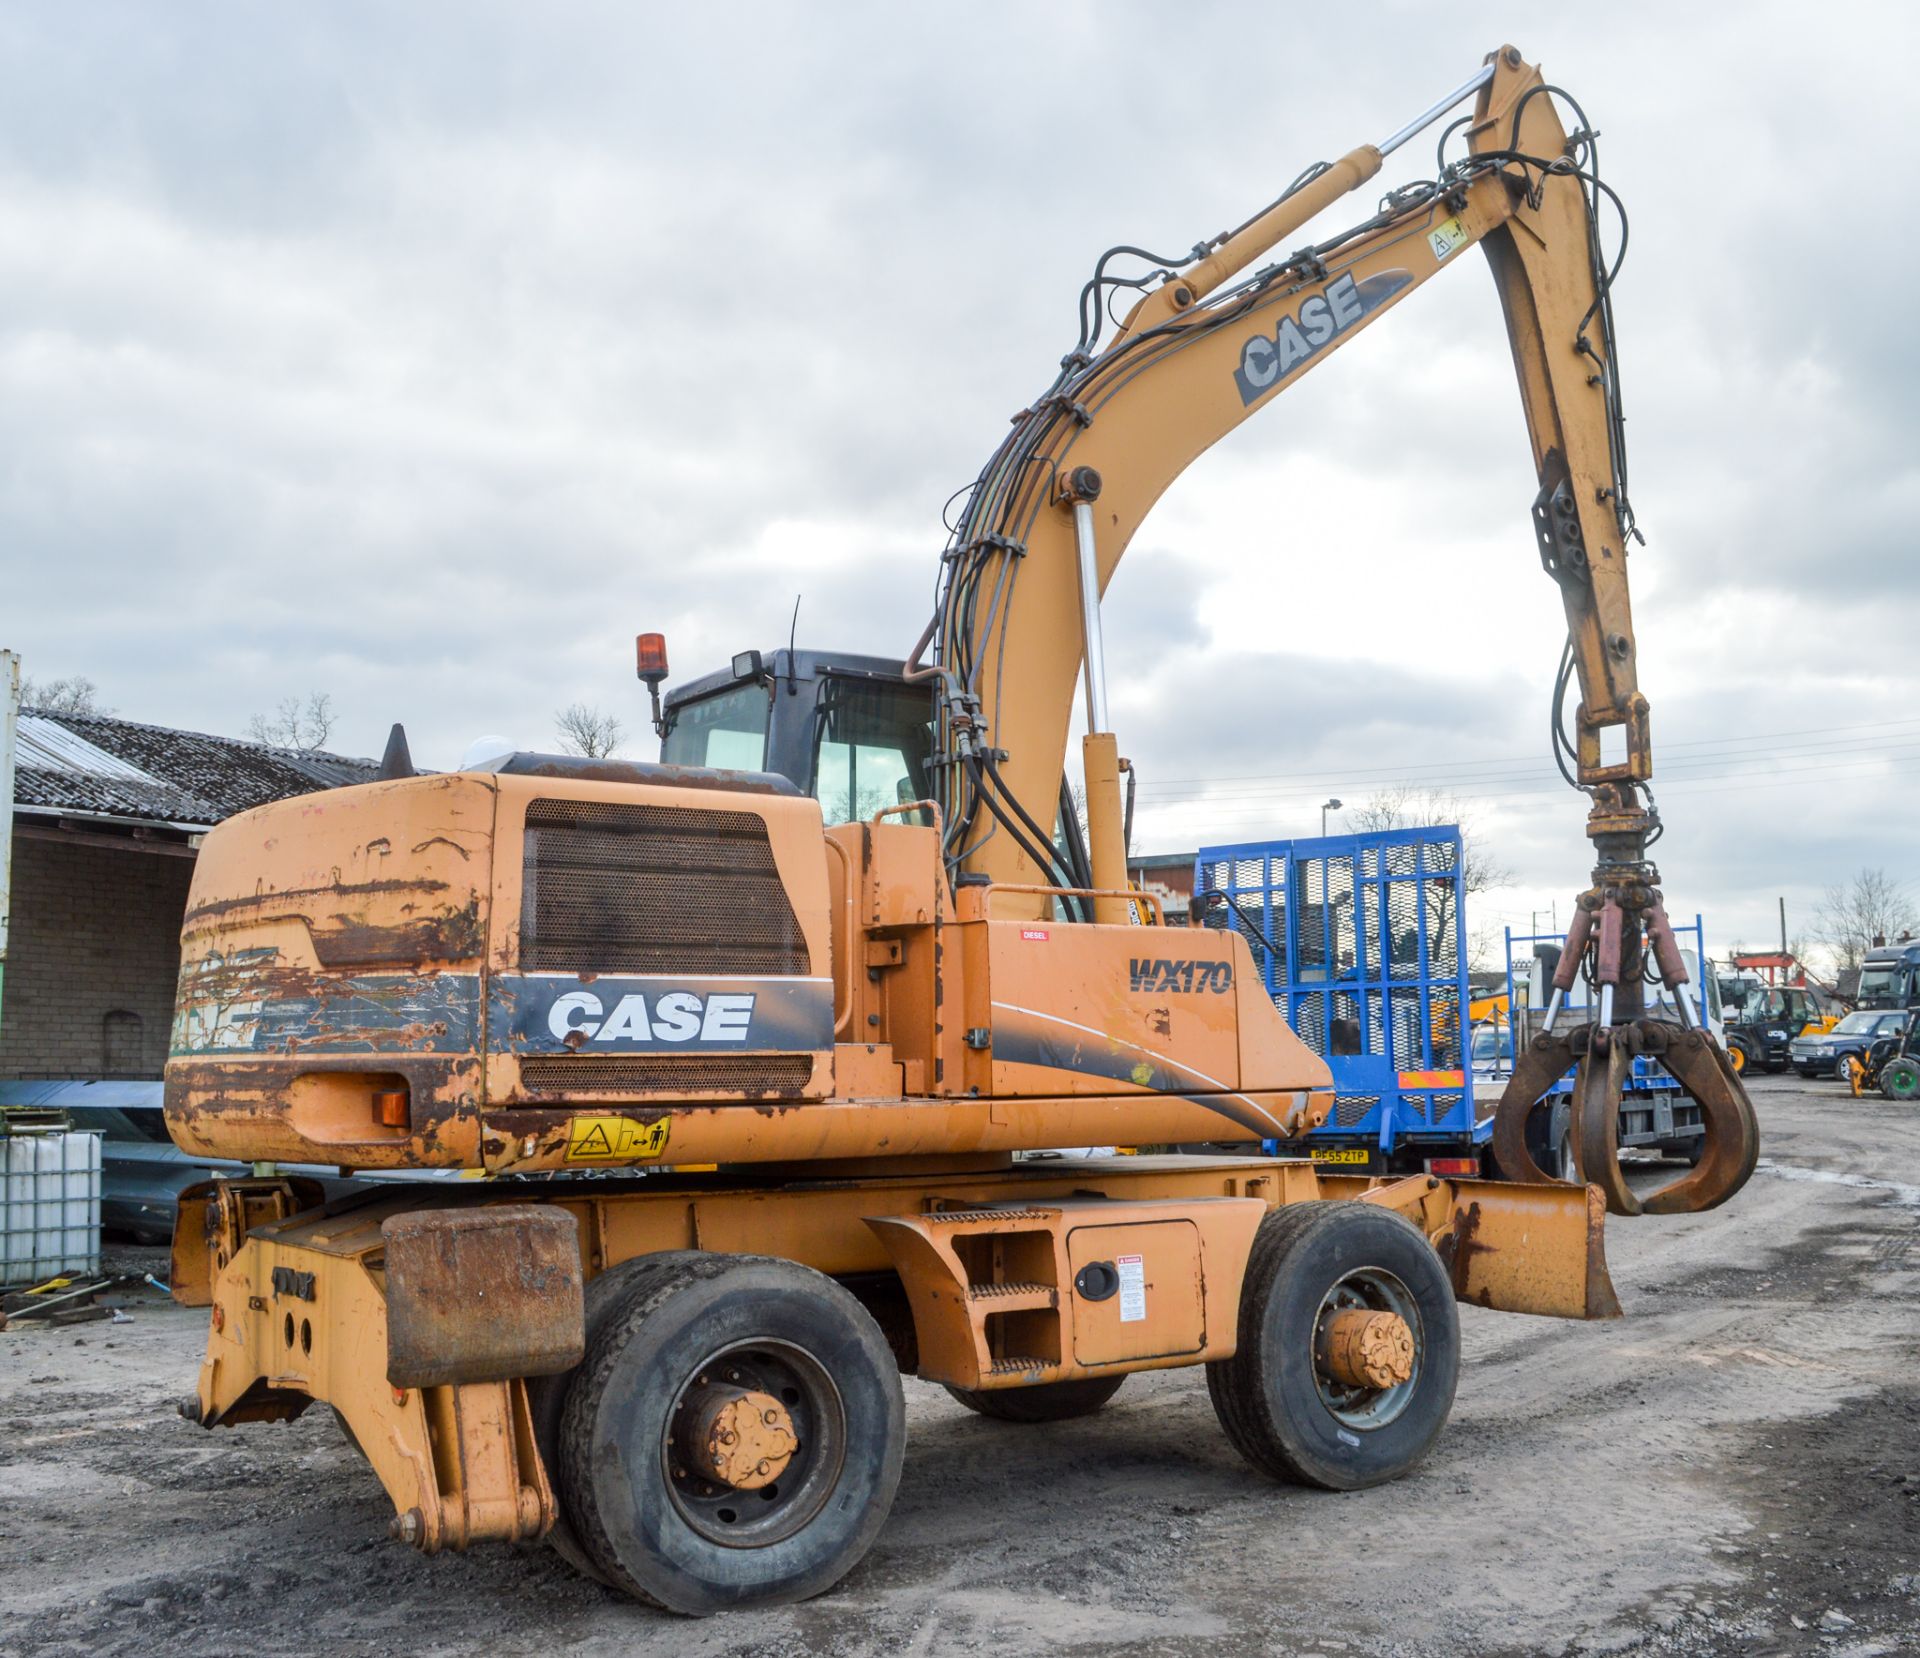 Case W170 17 tonne wheeled excavator Year: 2003 S/N: 232676 Recorded Hours: 10580 blade, piped & - Image 3 of 10